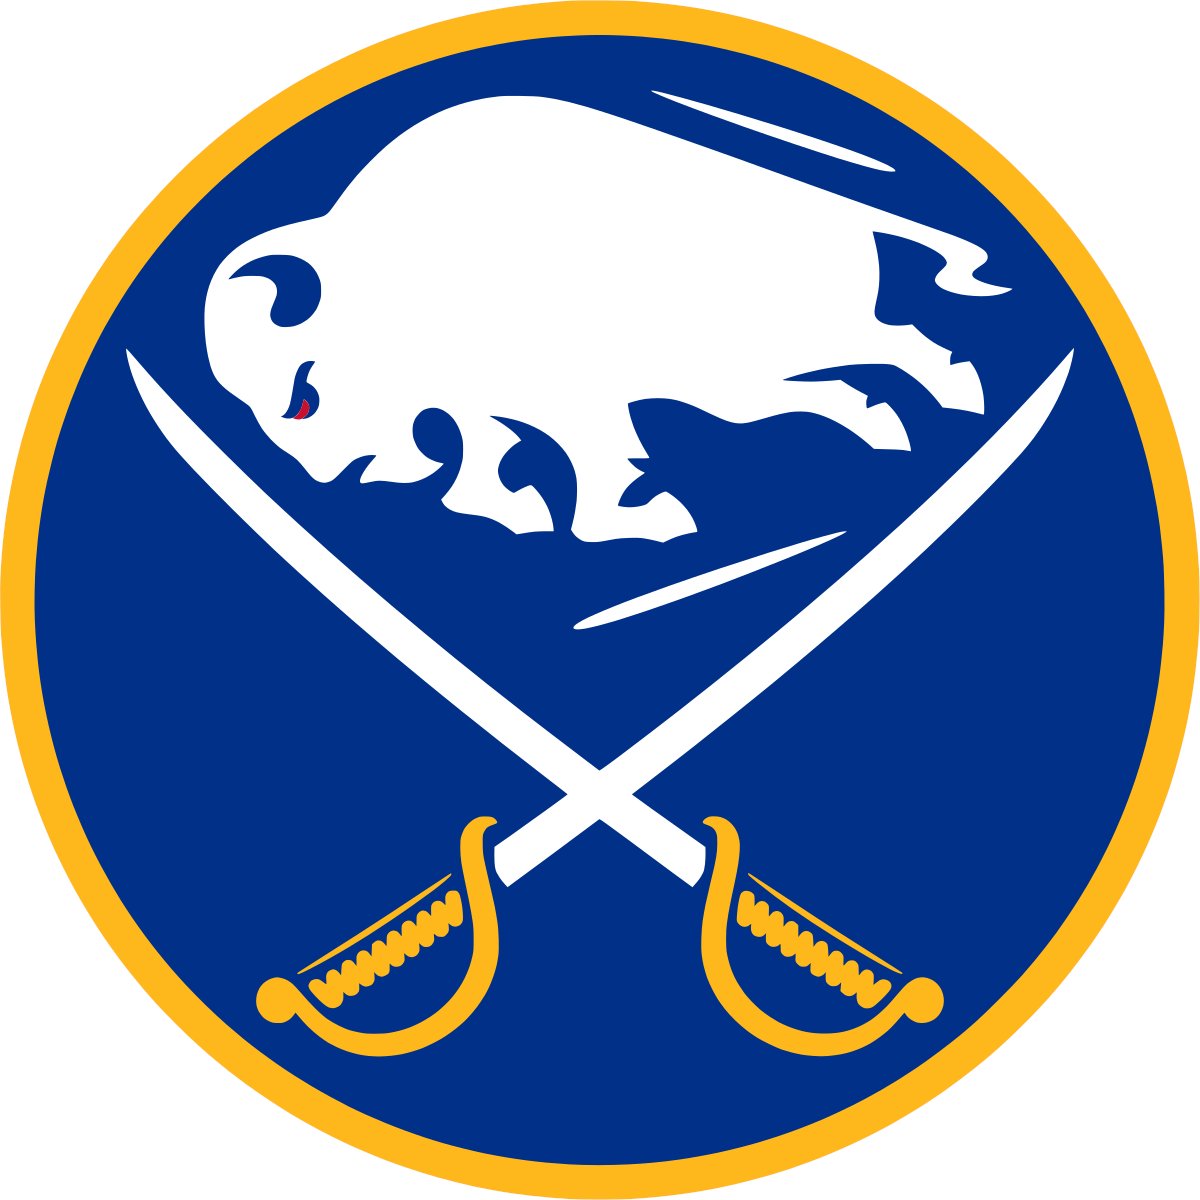 🇸🇰 Maxim Štrbák (D, 2005)  
➡️ Buffalo Sabres (45th Overall)    

Two-way, right-handed defenseman, mostly inclined towards defensive work, does have the offensive tools, good shot, works well with his stick, blocks shots, cleans the opposition around the net. #2023NHLDraft